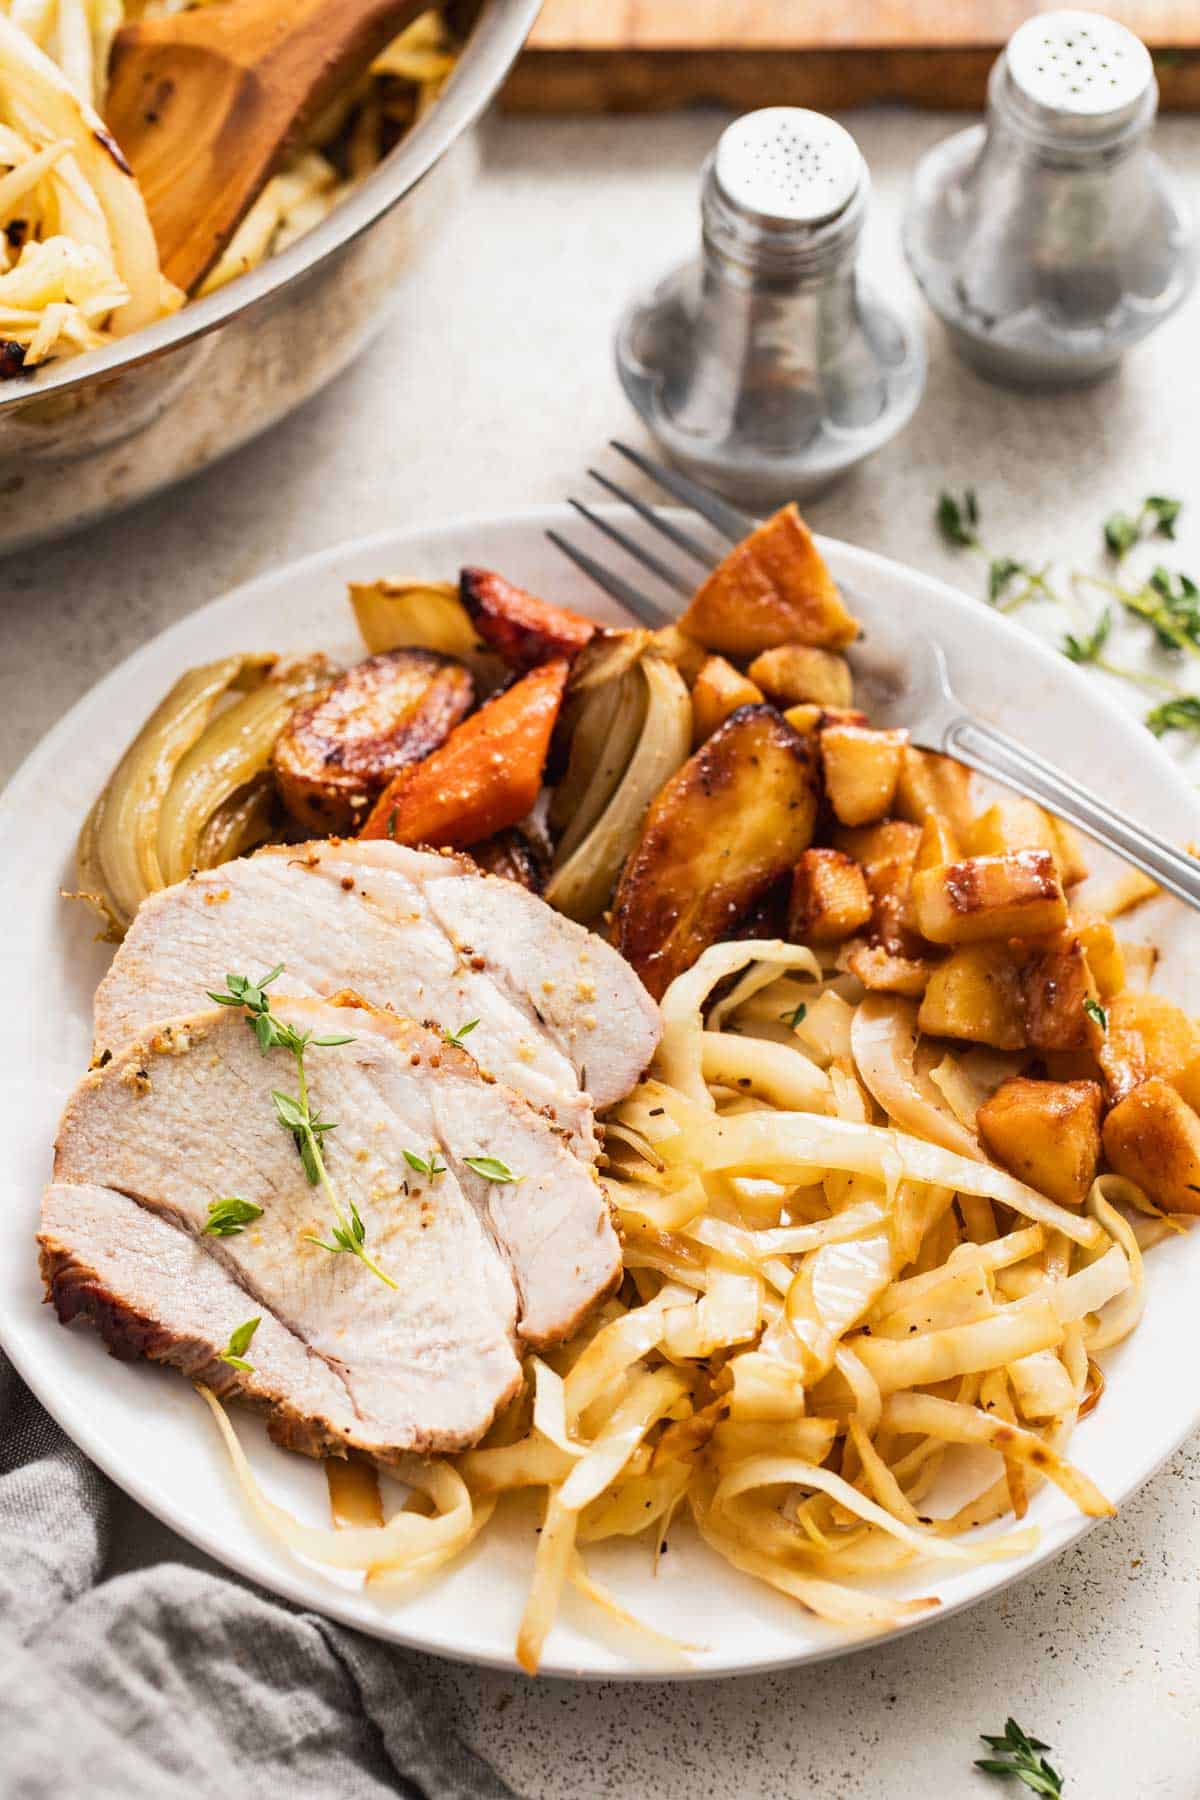 Sliced roasted pork next to cabbage, apples, and roasted root vegetables on a white table.